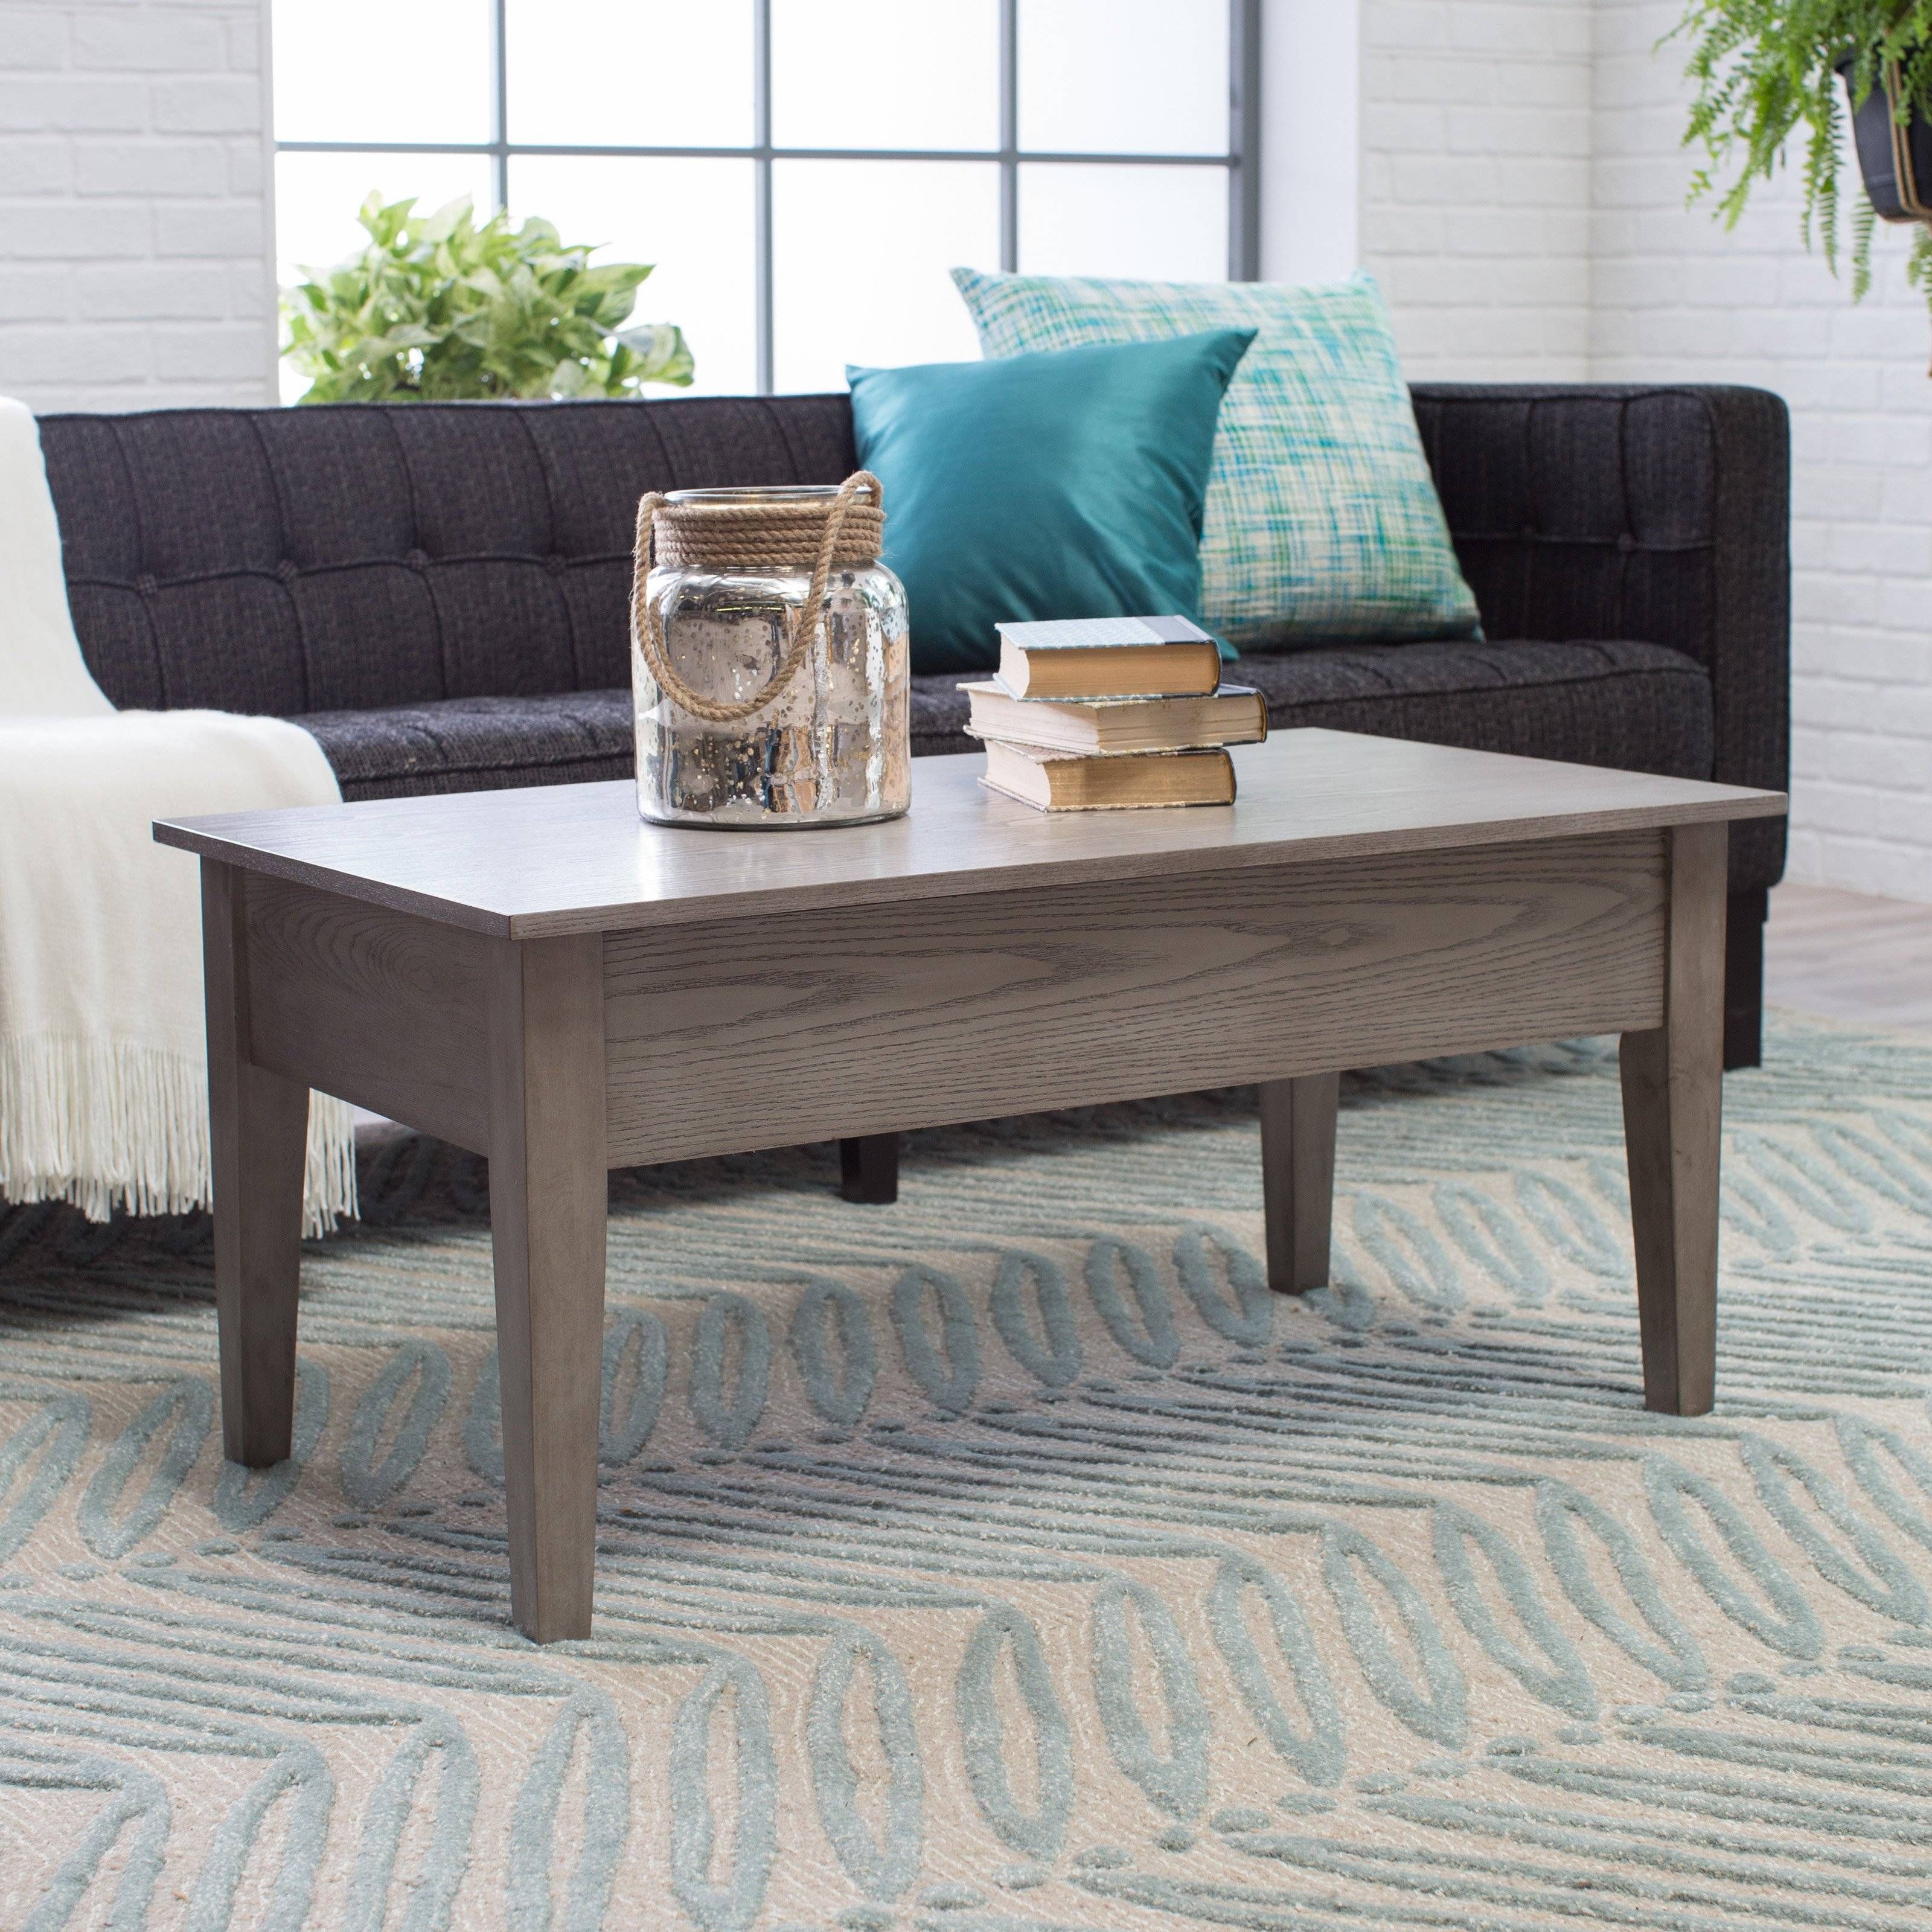 Turner Lift Top Coffee Table – Gray | Hayneedle Inside Coffee Tables With Lift Up Top (View 5 of 30)